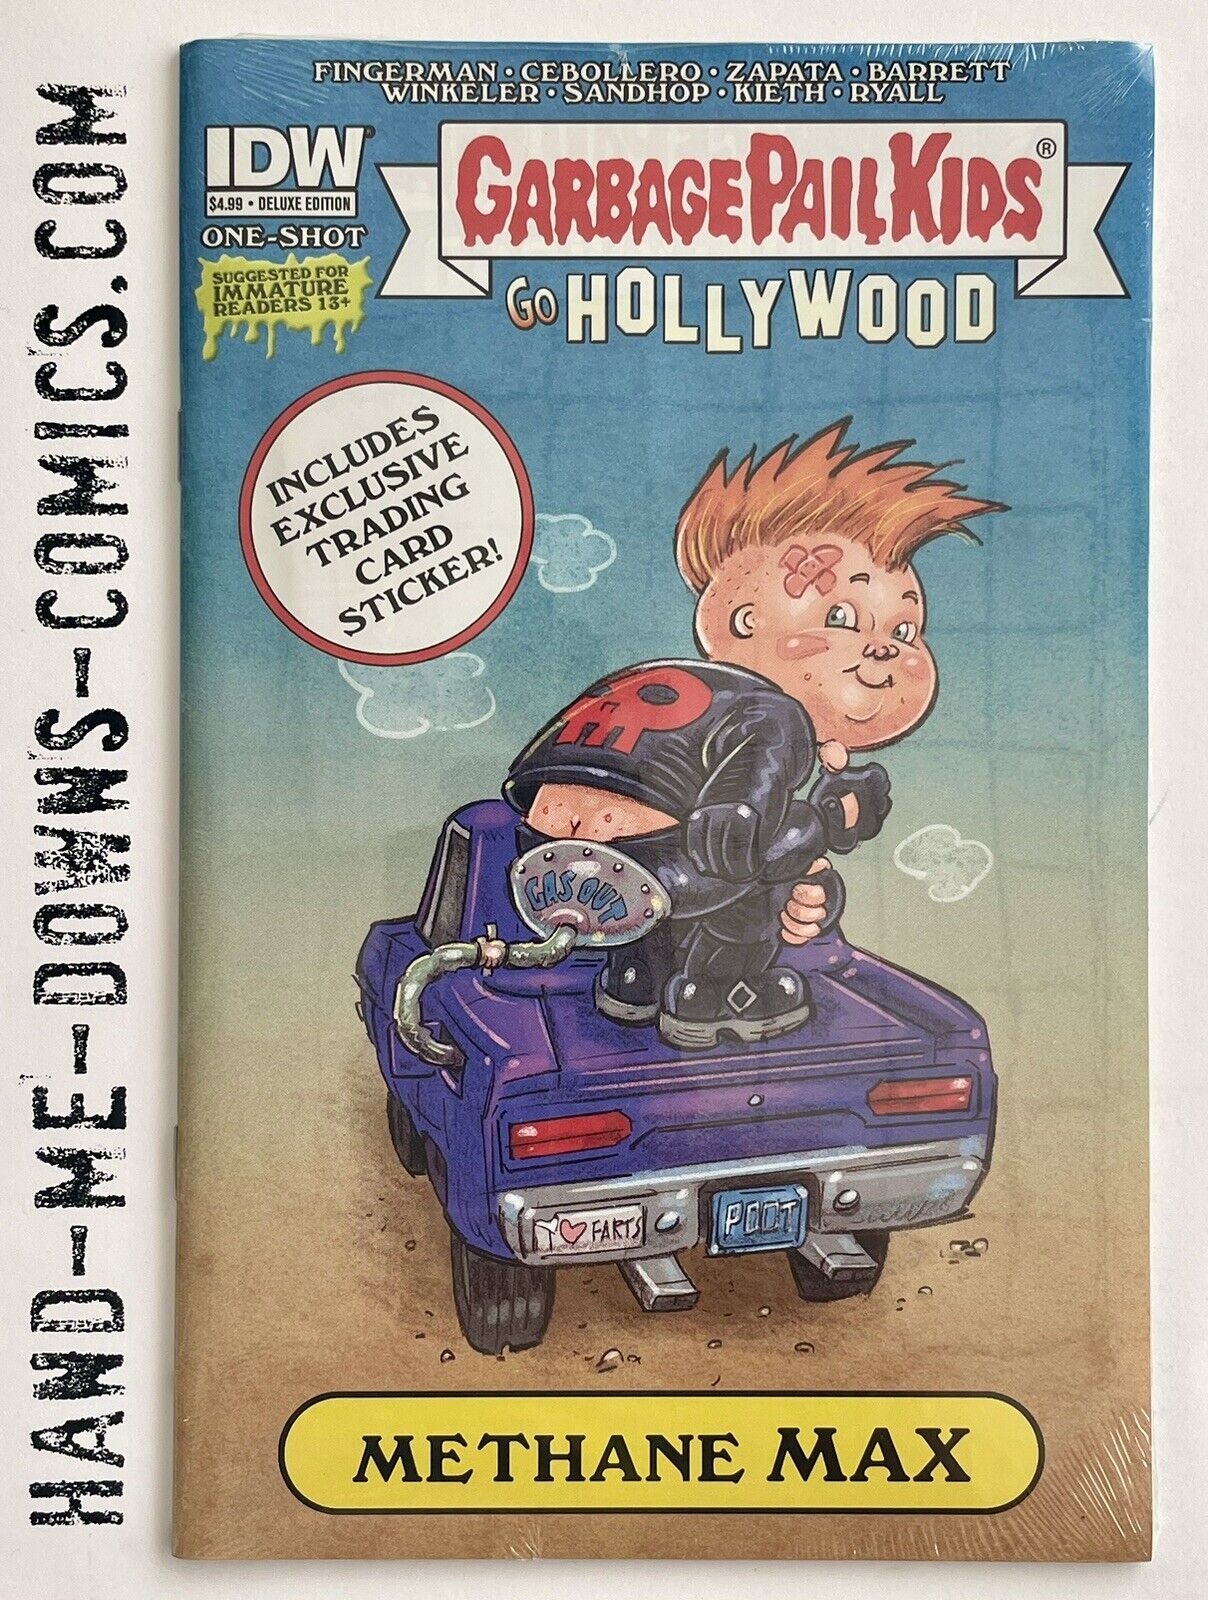 Garbage Pail Kids Go Hollywood 1 - Methane Max -2015 - IDW Deluxe Edition - NM